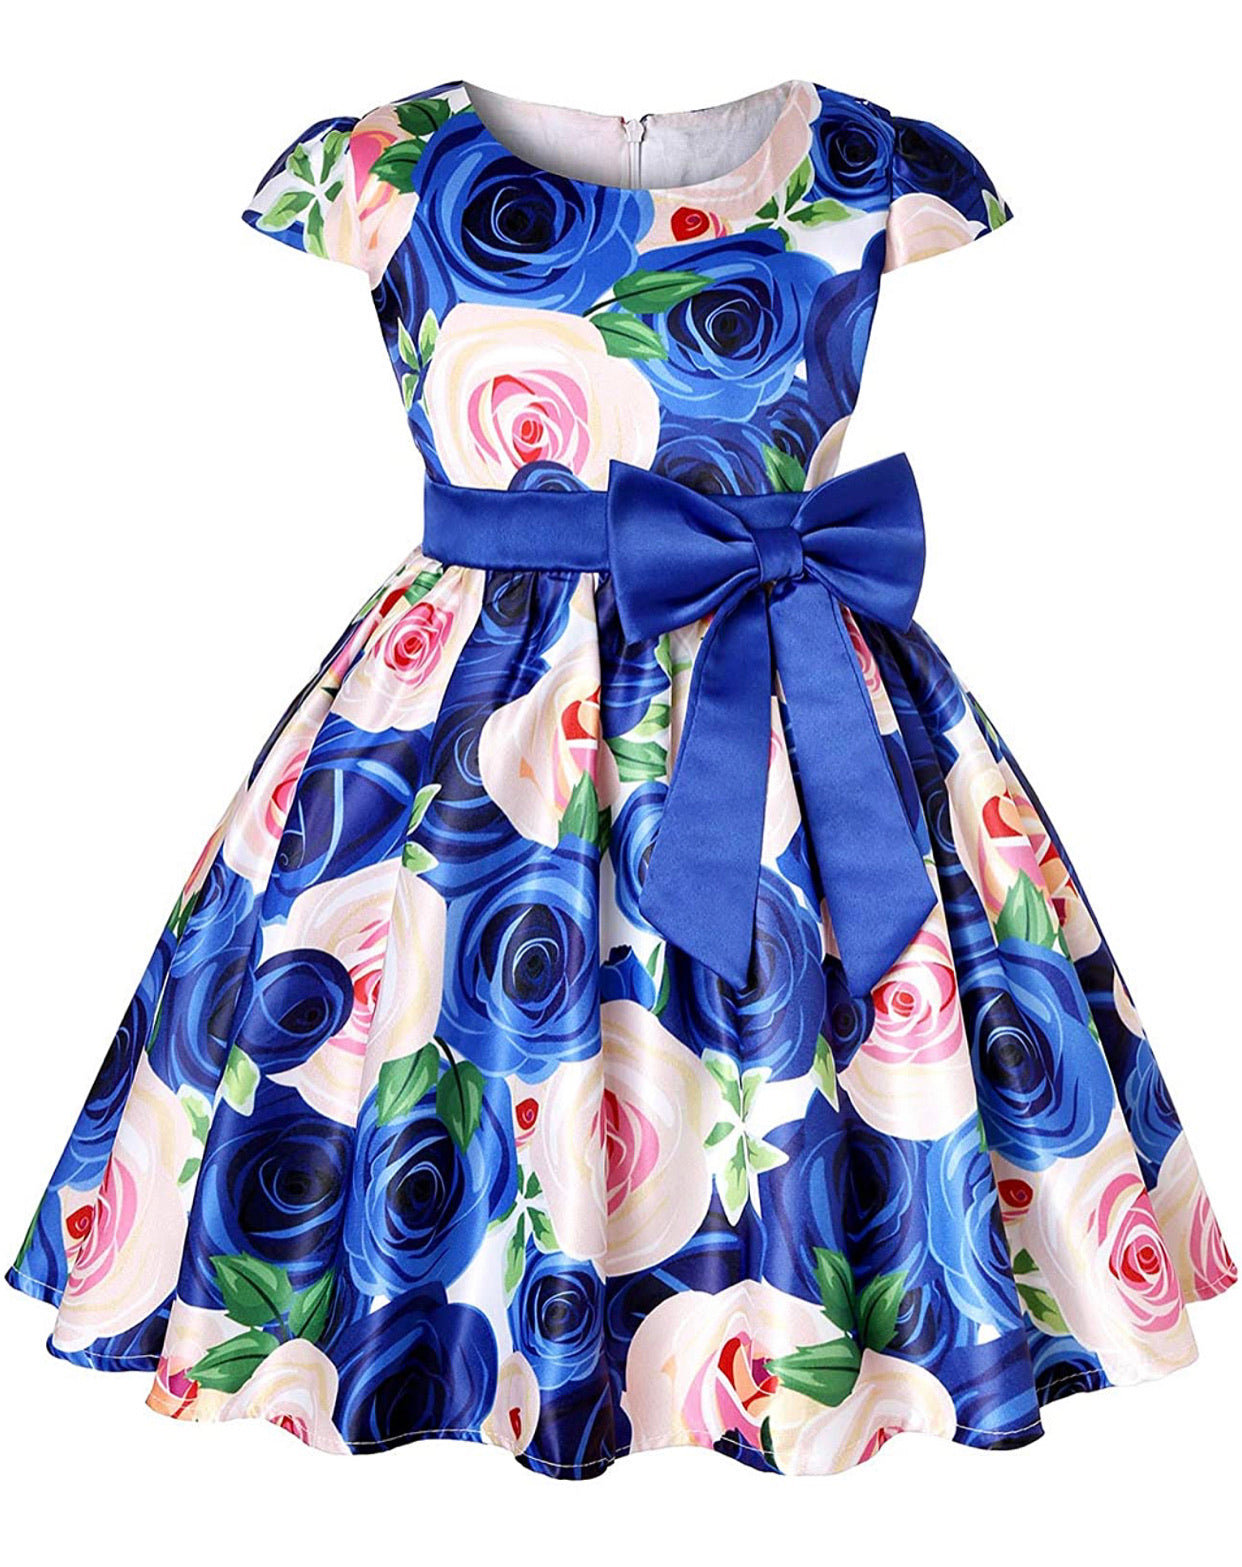 Little Girl’s Blue Floral Bow-Tie Party Dress, Sizes 2T - 14 years